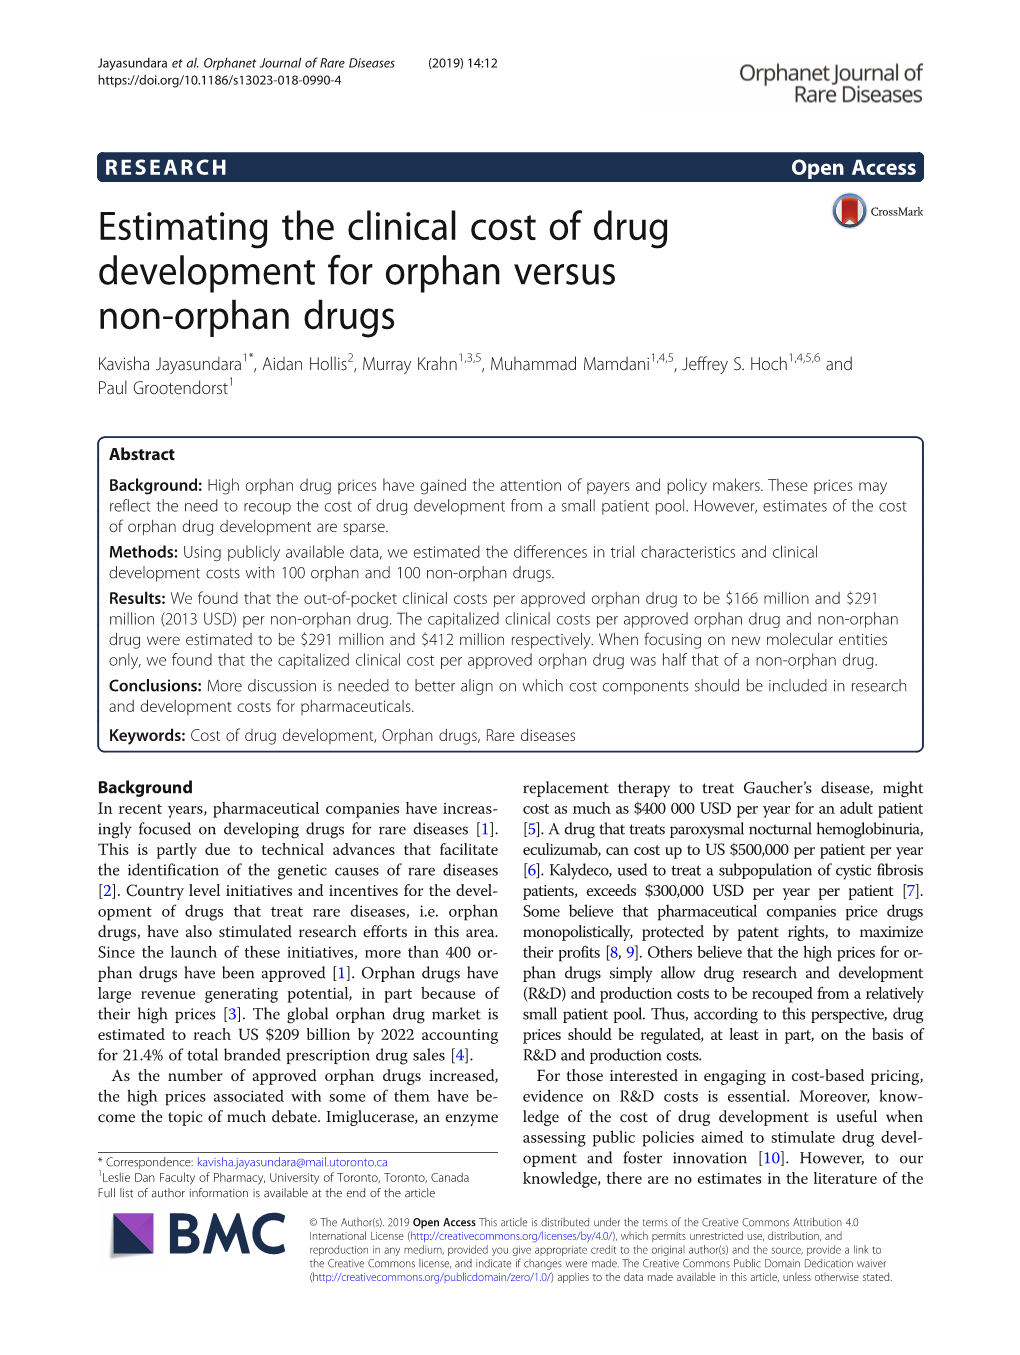 Estimating the Clinical Cost of Drug Development for Orphan Versus Non